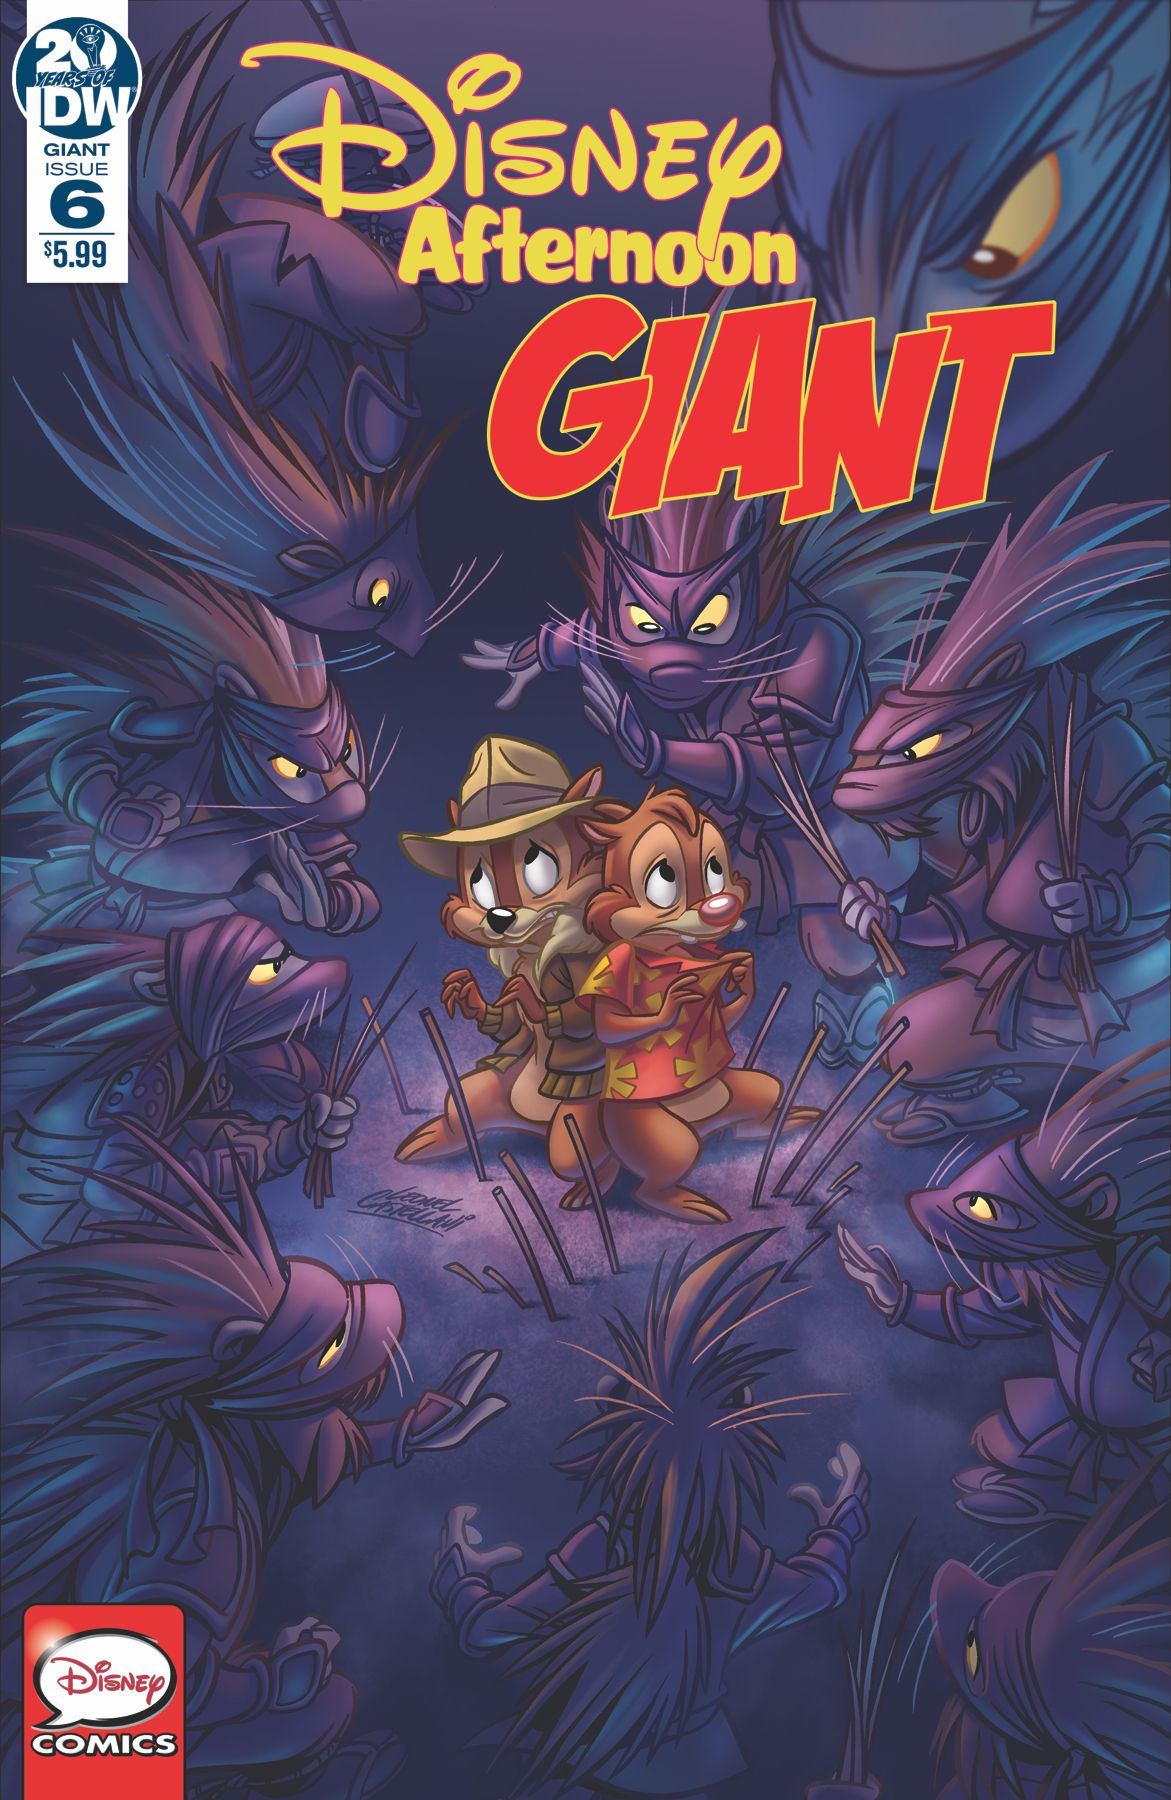 Disney Afternoon Giant #6 Comic